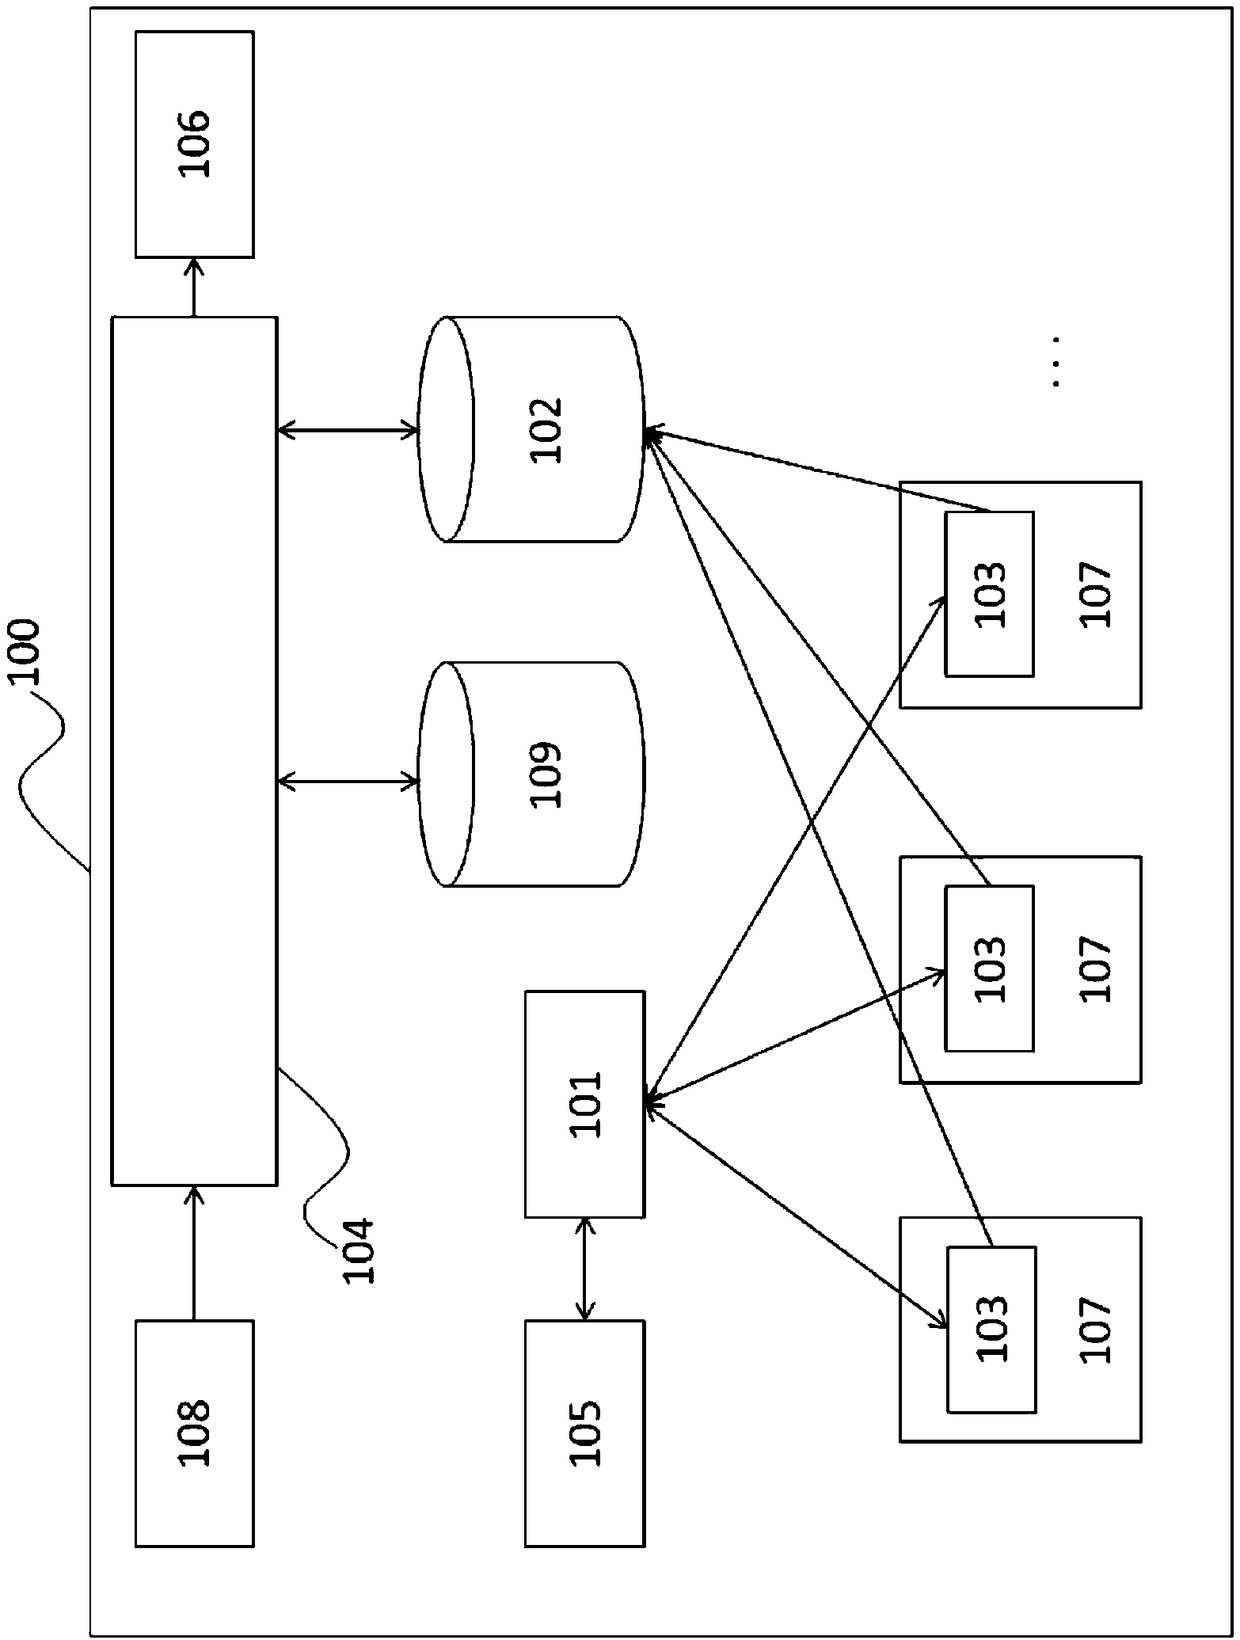 Task scheduling and resource provisioning system and method